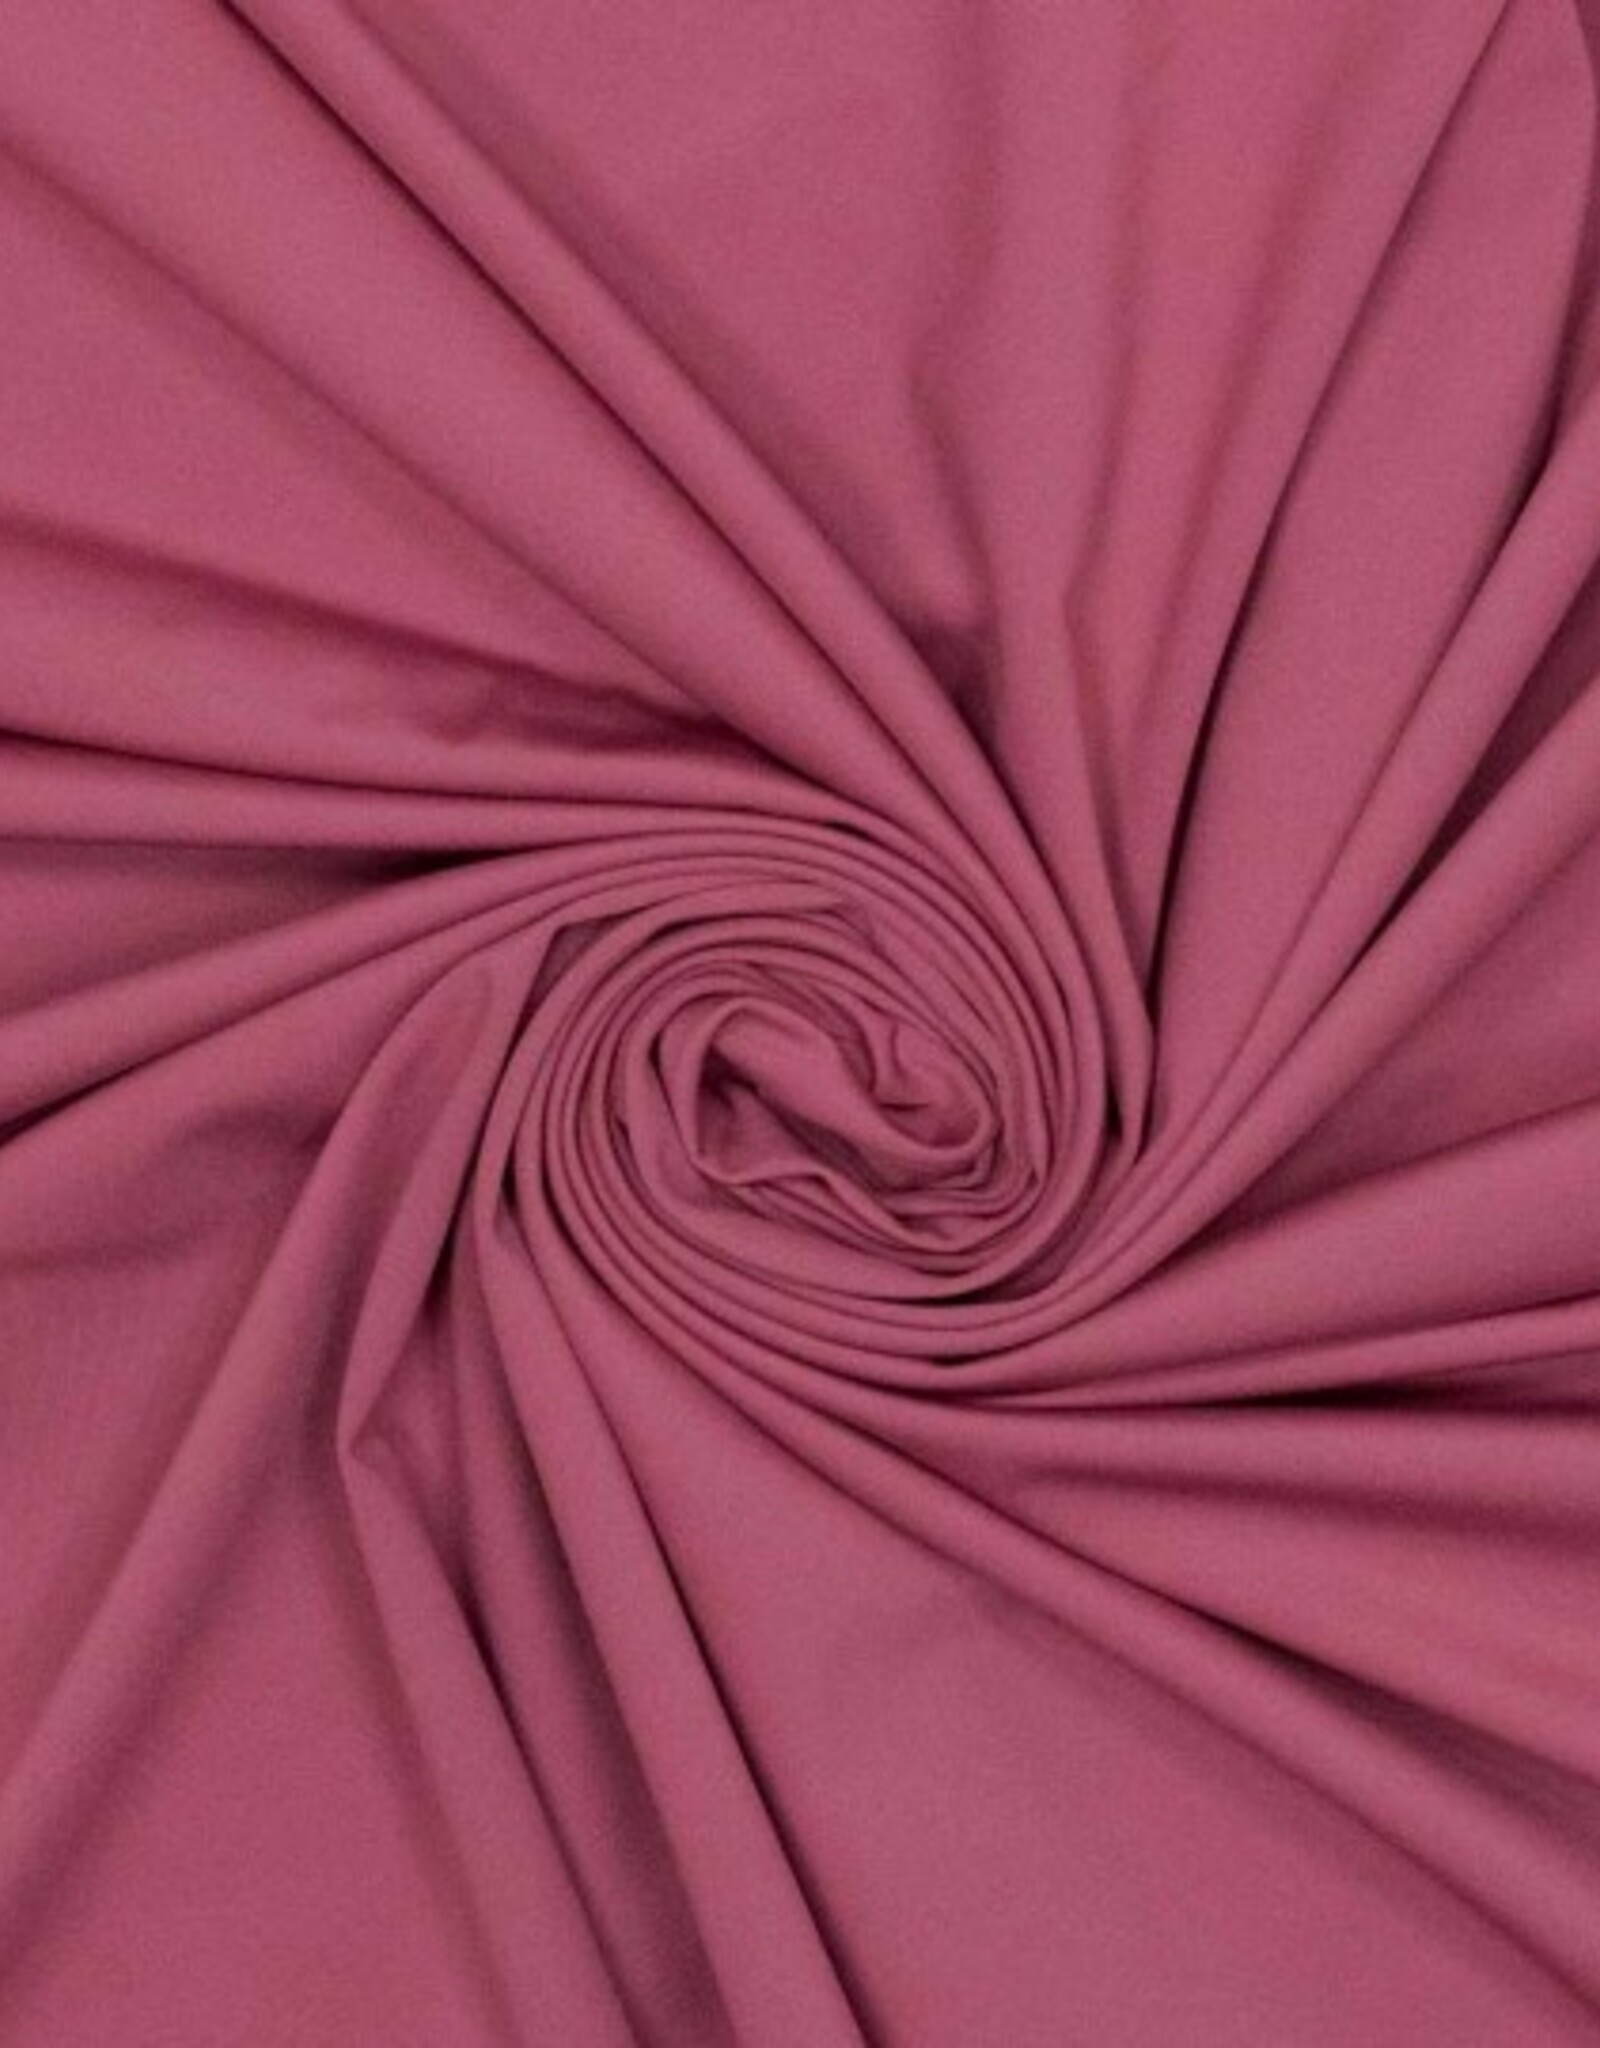 Stoffenschuur selectie Yoga fabric pink